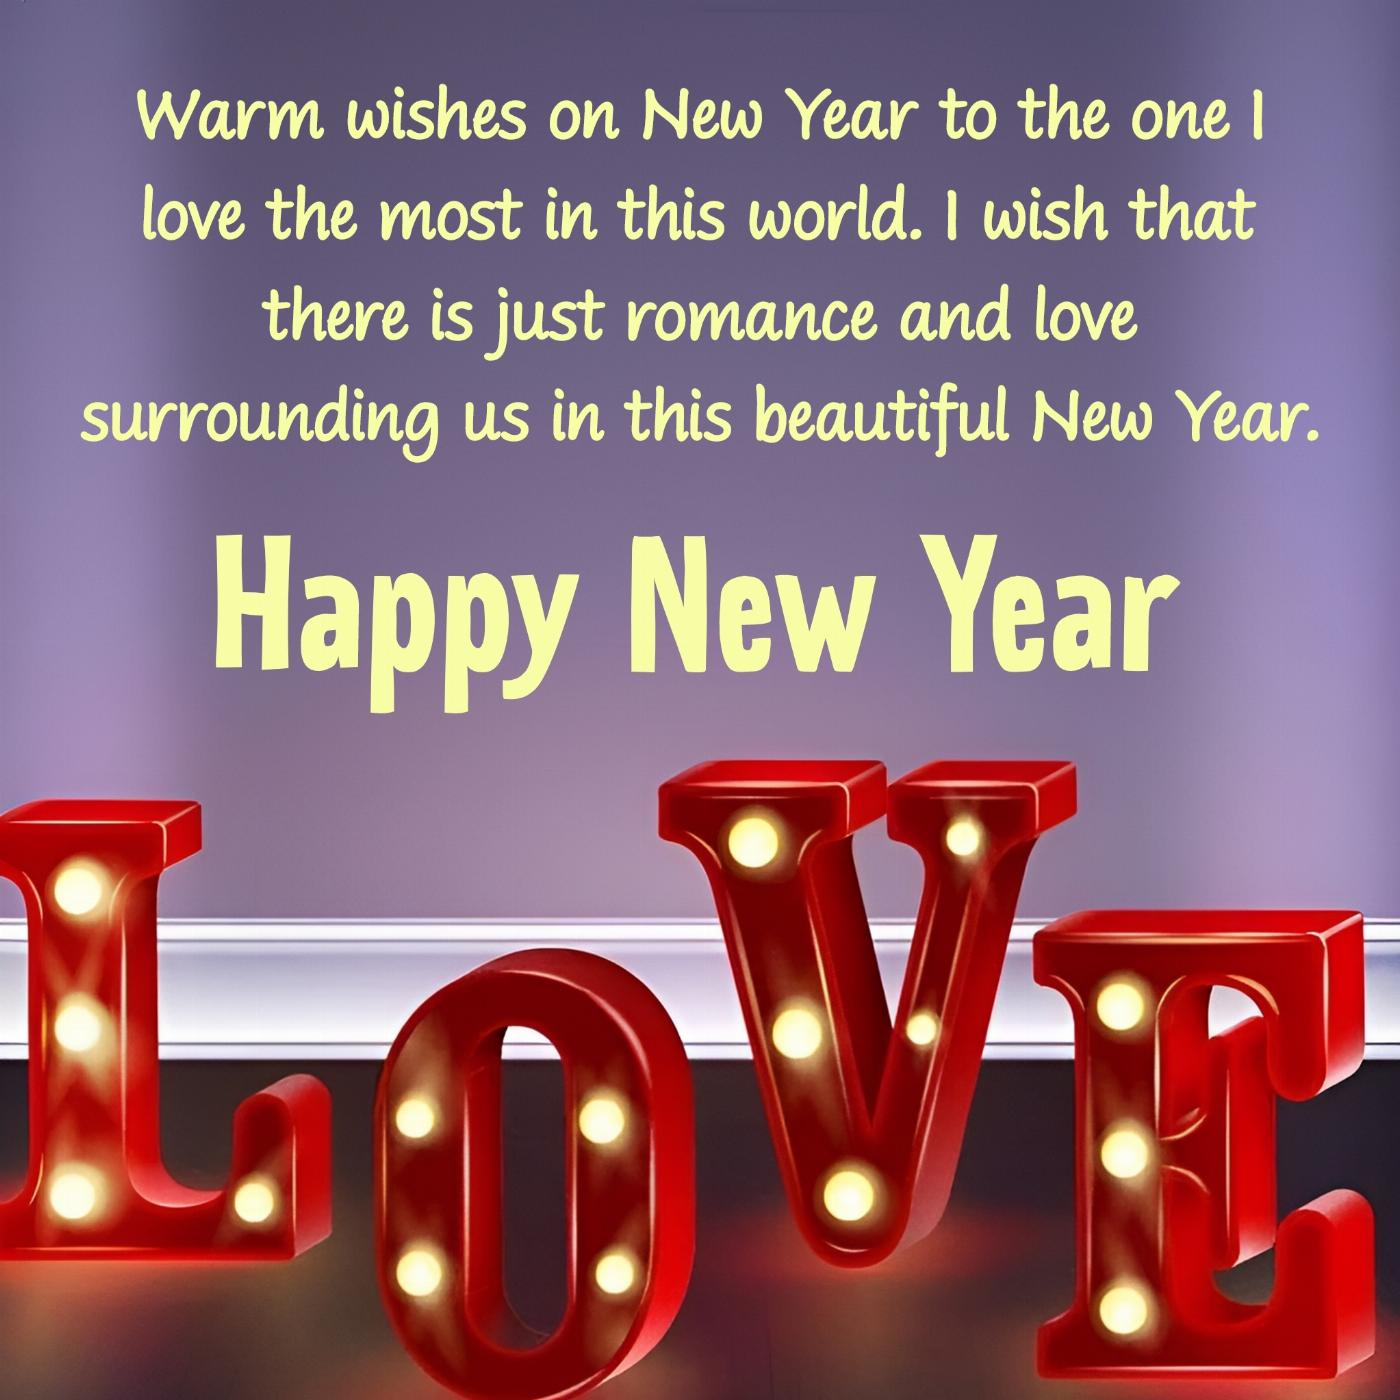 Warm wishes on New Year to the one I love